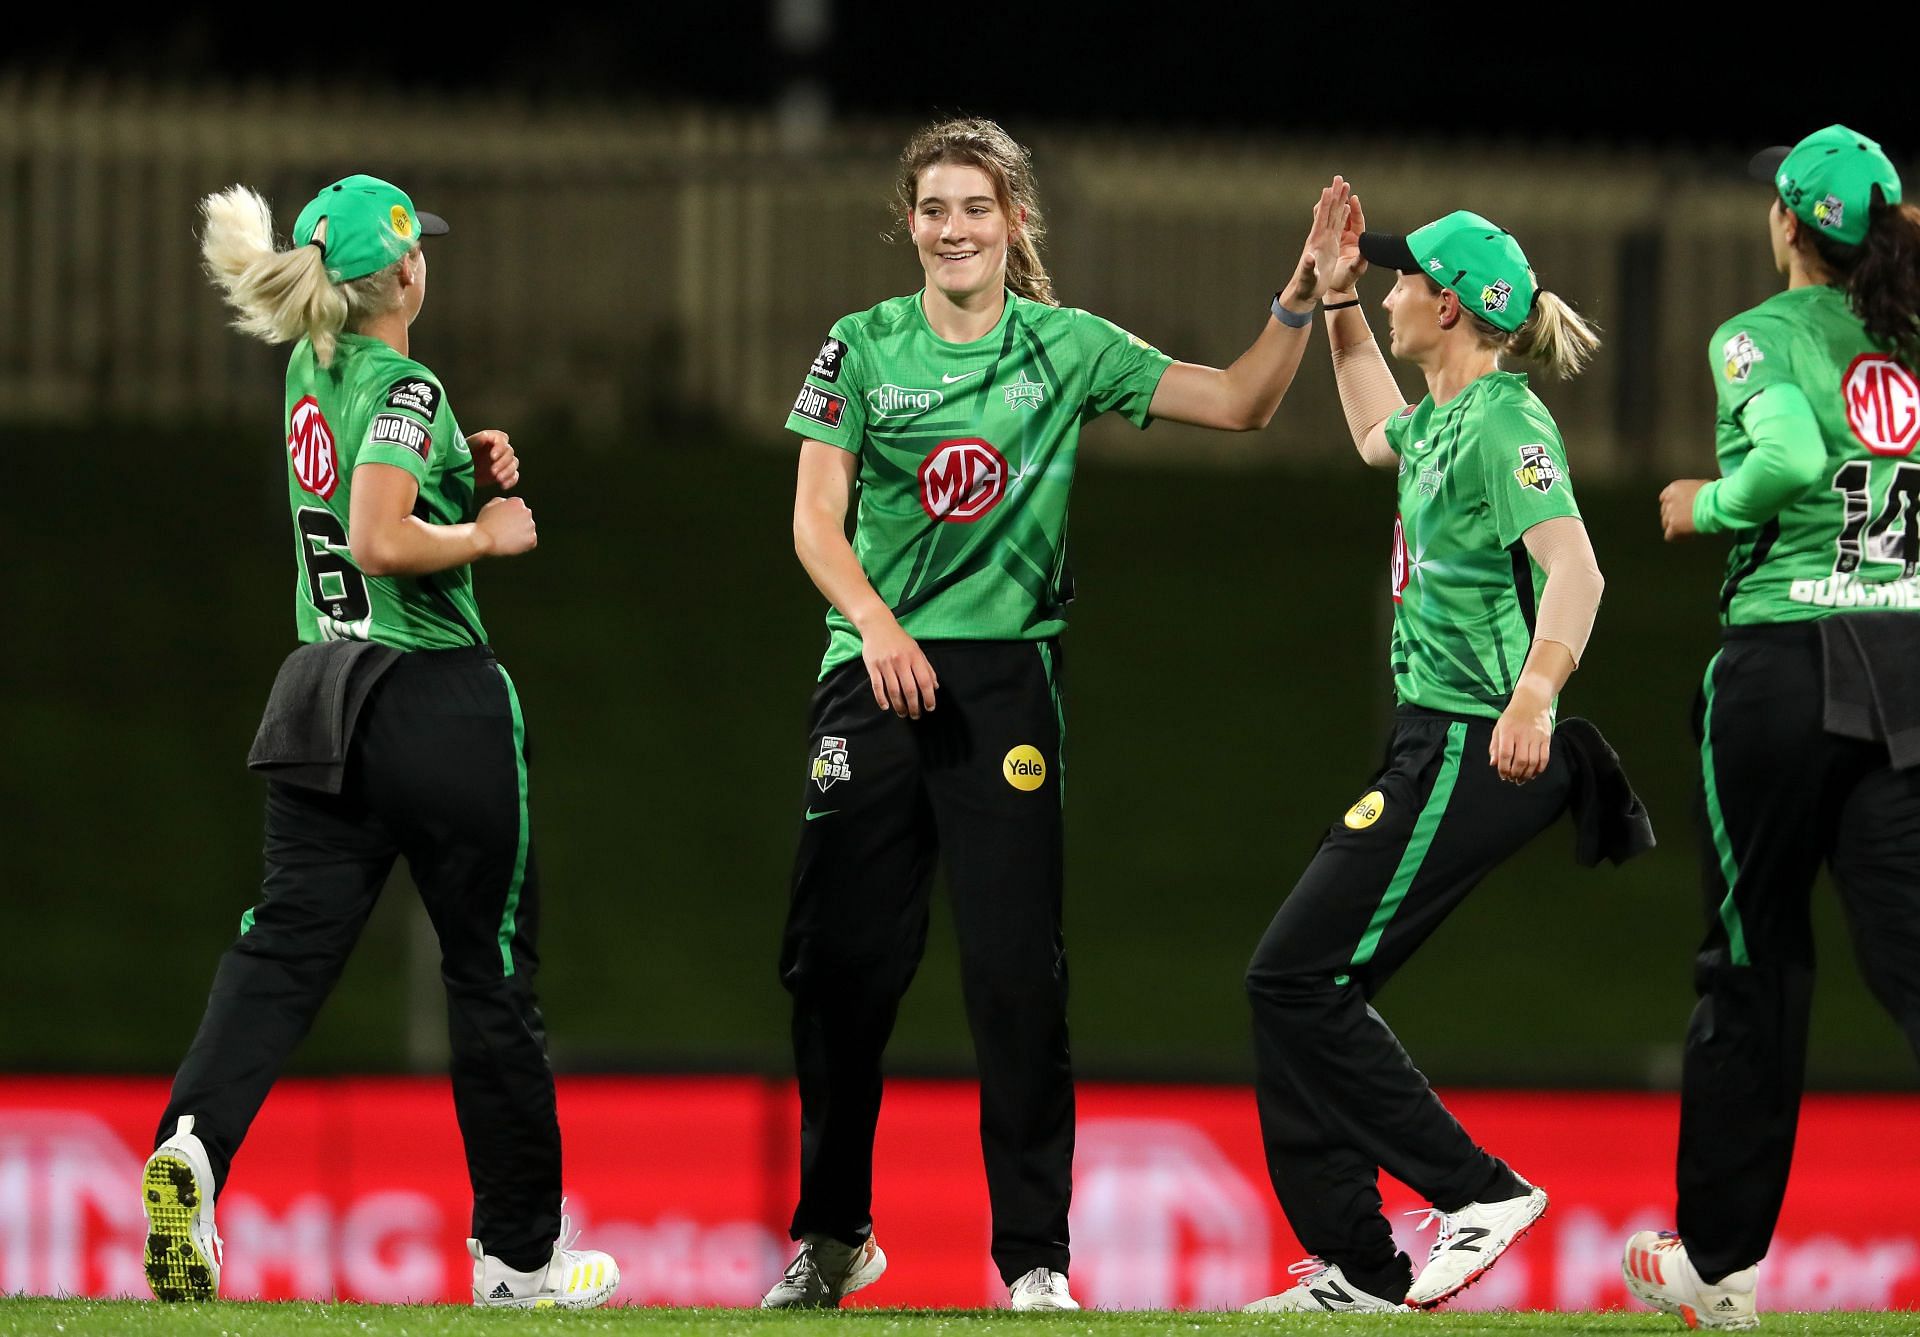 The Melbourne Stars Women&#039;s team in action